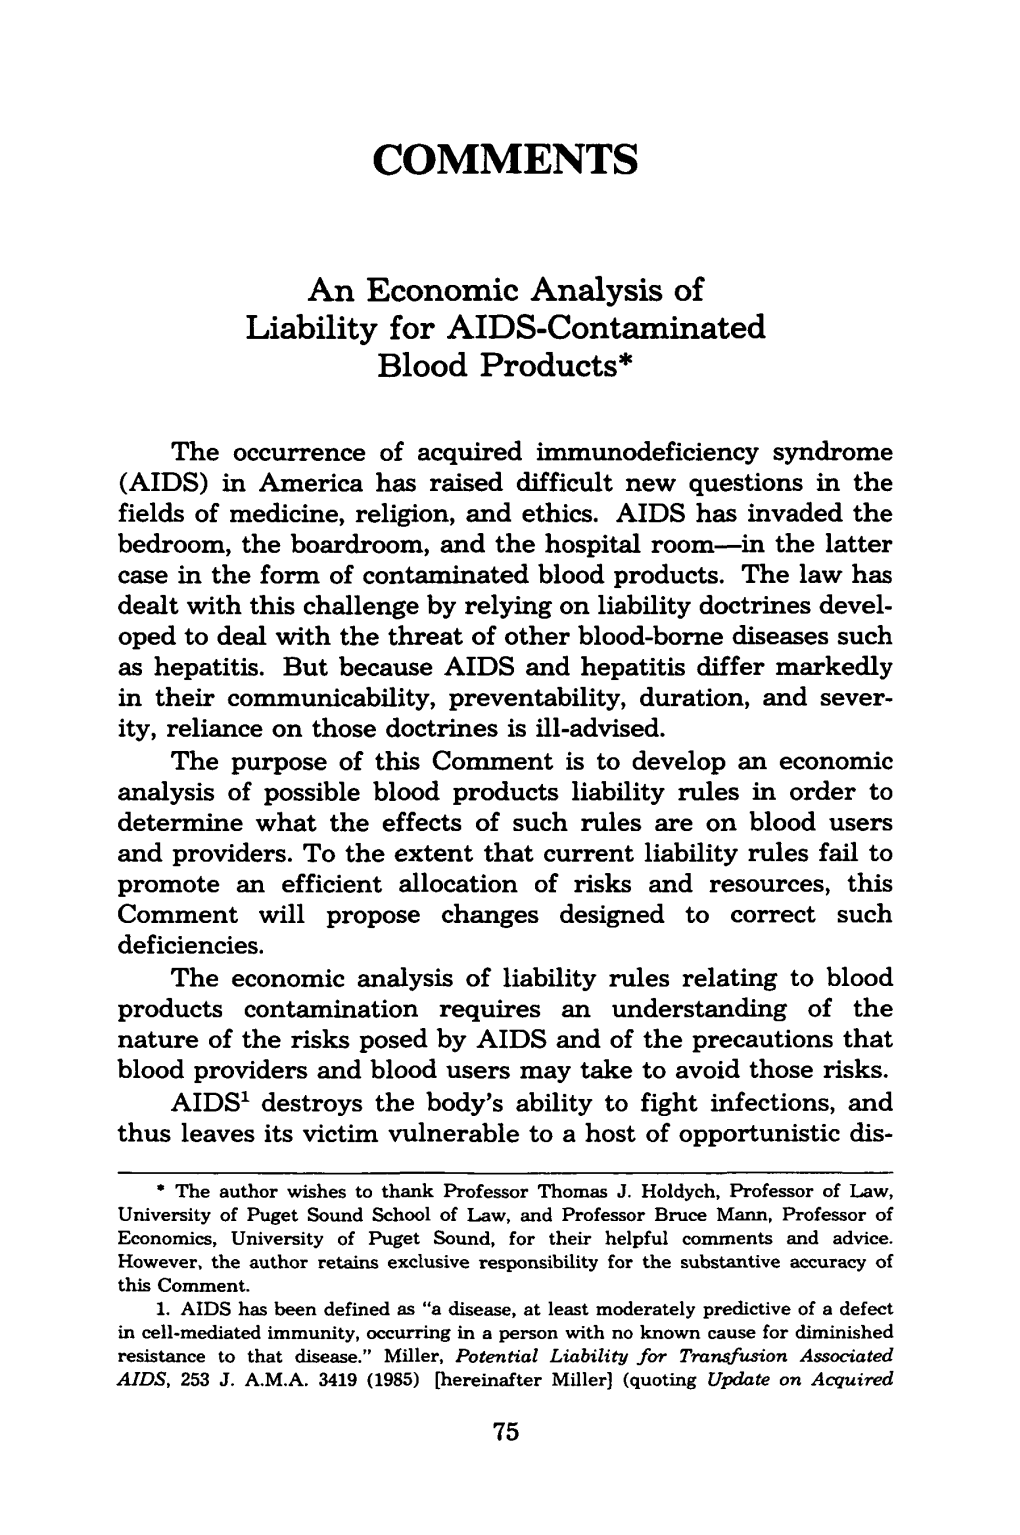 An Economic Analysis of Liability for AIDS-Contaminated Blood Products*